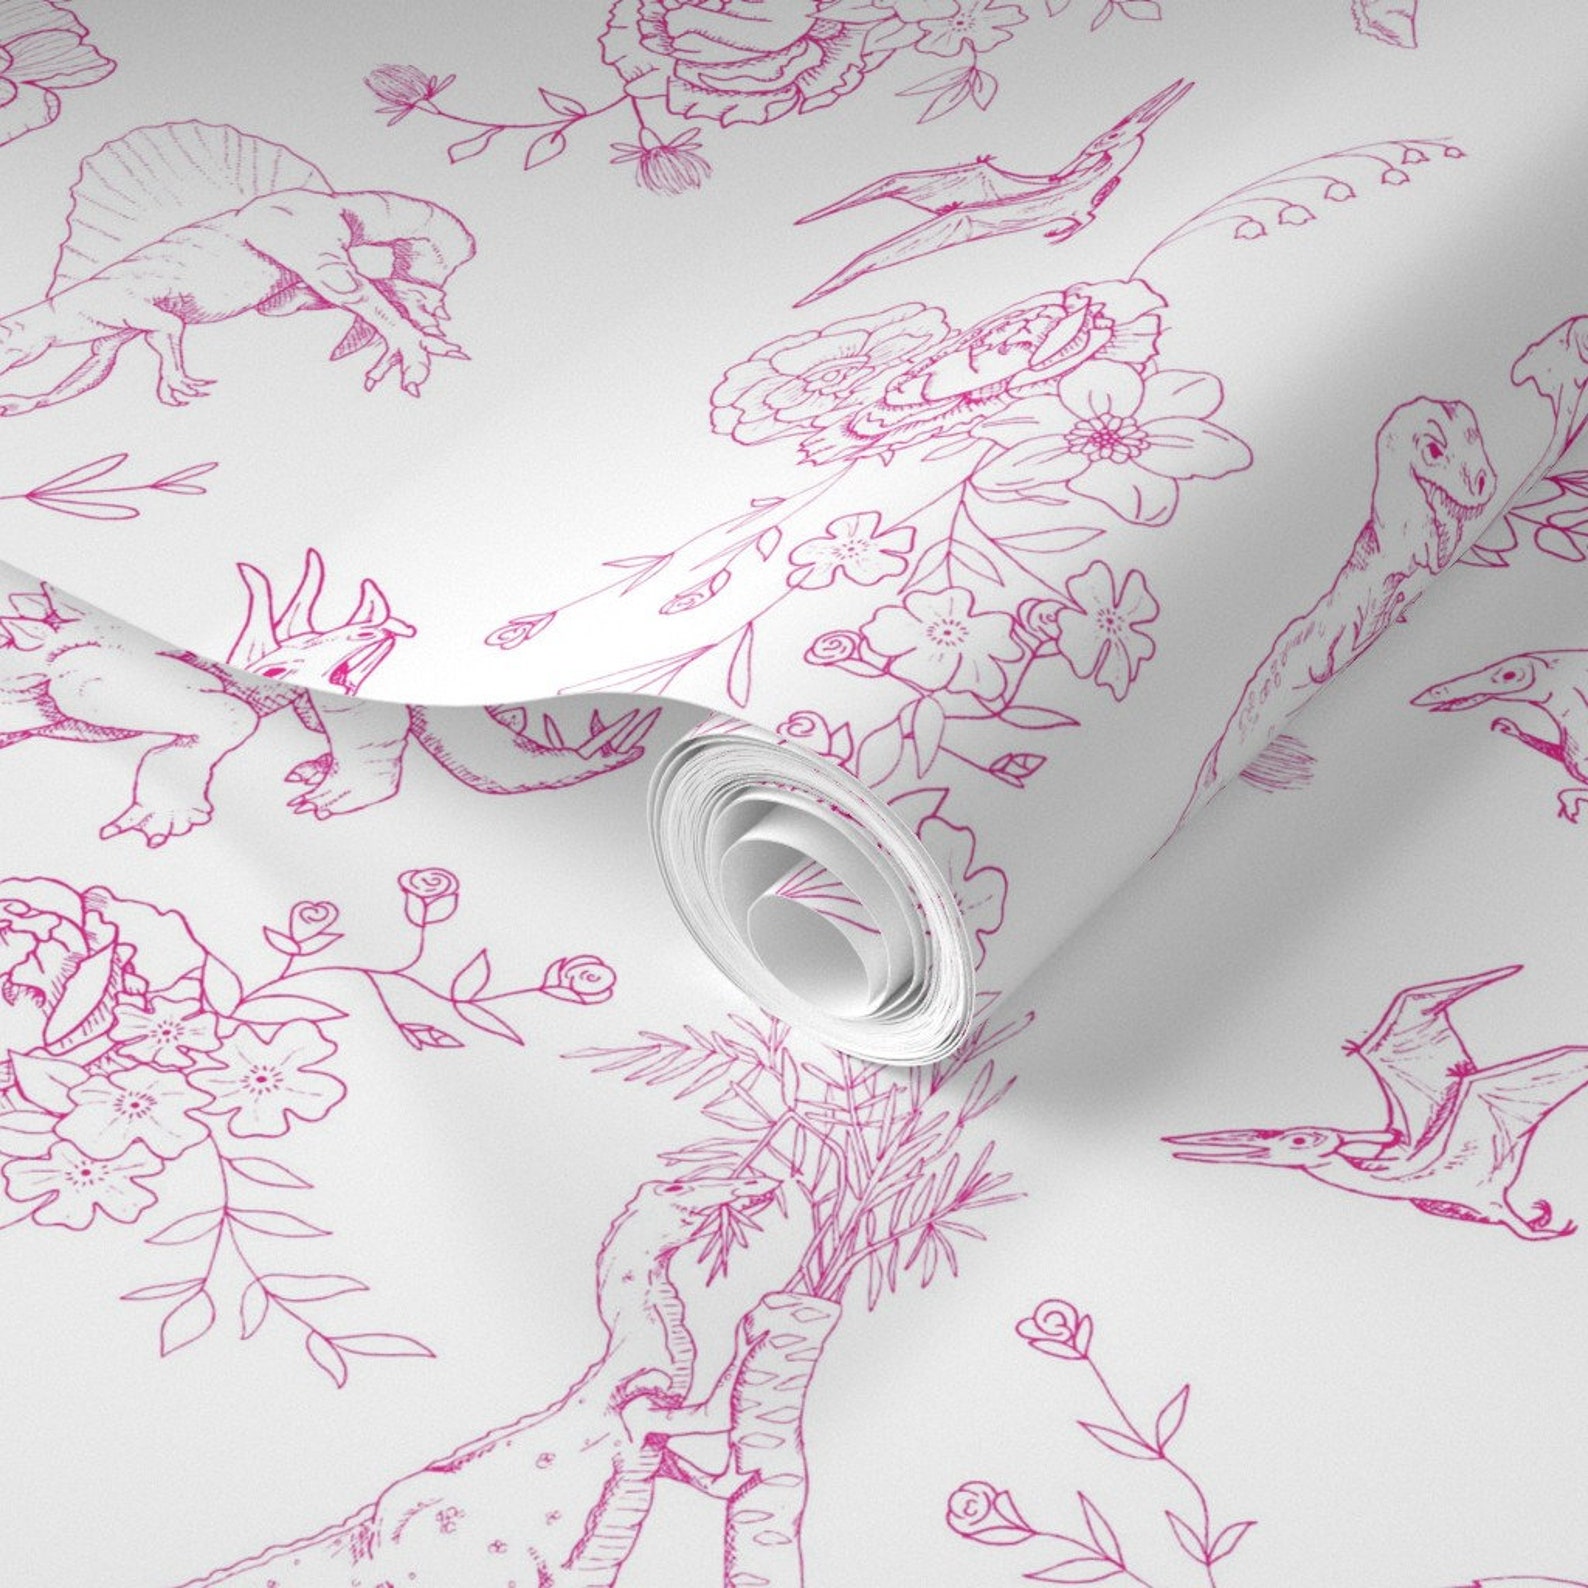 Dinosaur Wallpaper Dino Toile Hot Pink by Hey There Louise - Etsy